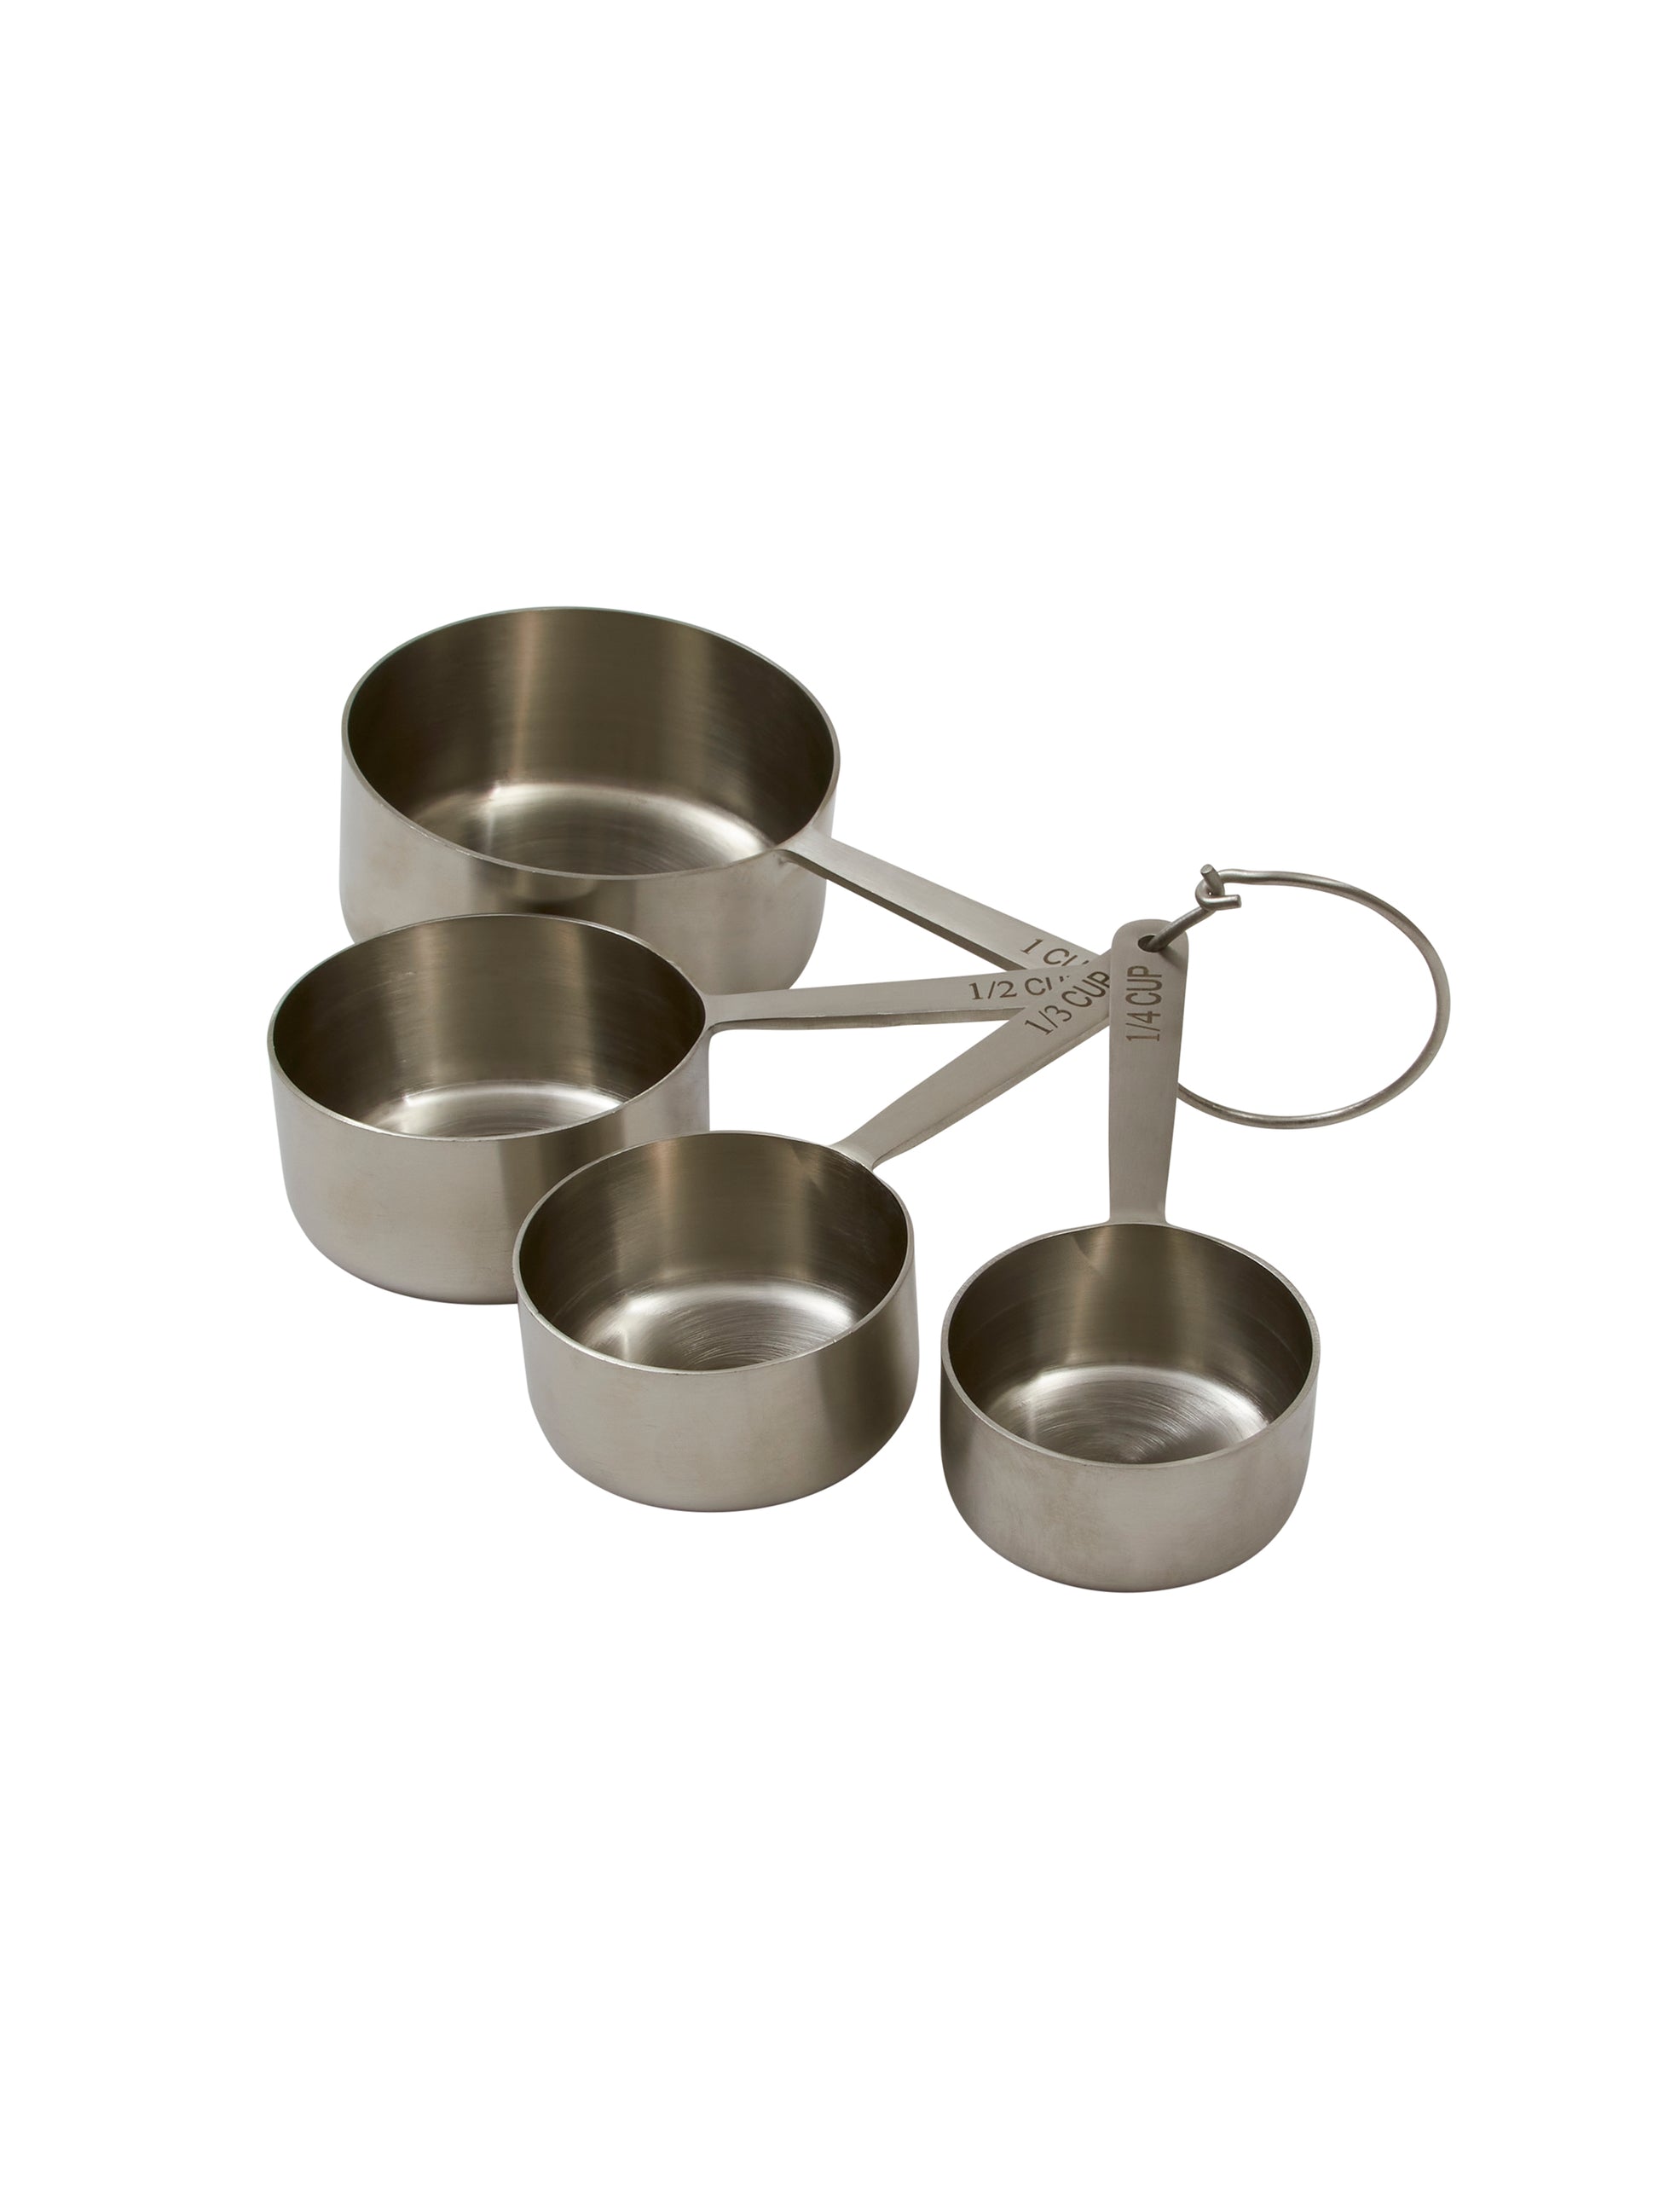 Simply Gourmet Measuring Cups and Spoons Set - Stainless Steel Measuring  Cups